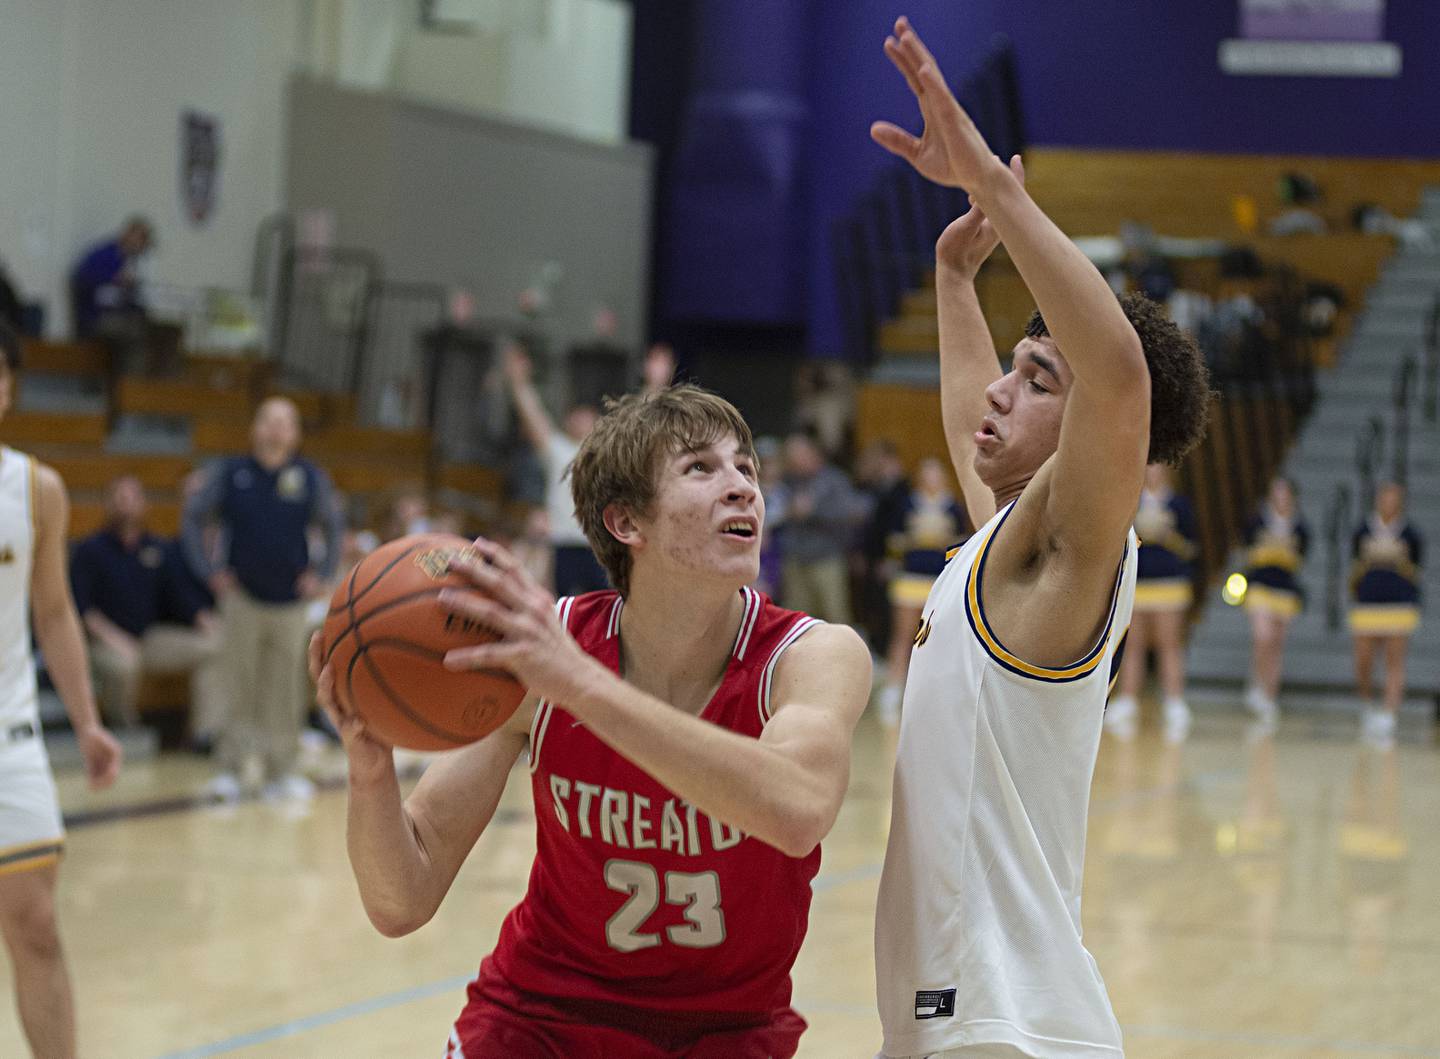 Streator's Jack Haynes looks to put up a shot against Sterling in a semifinal regional game on Wednesday, Feb. 23, 2022.